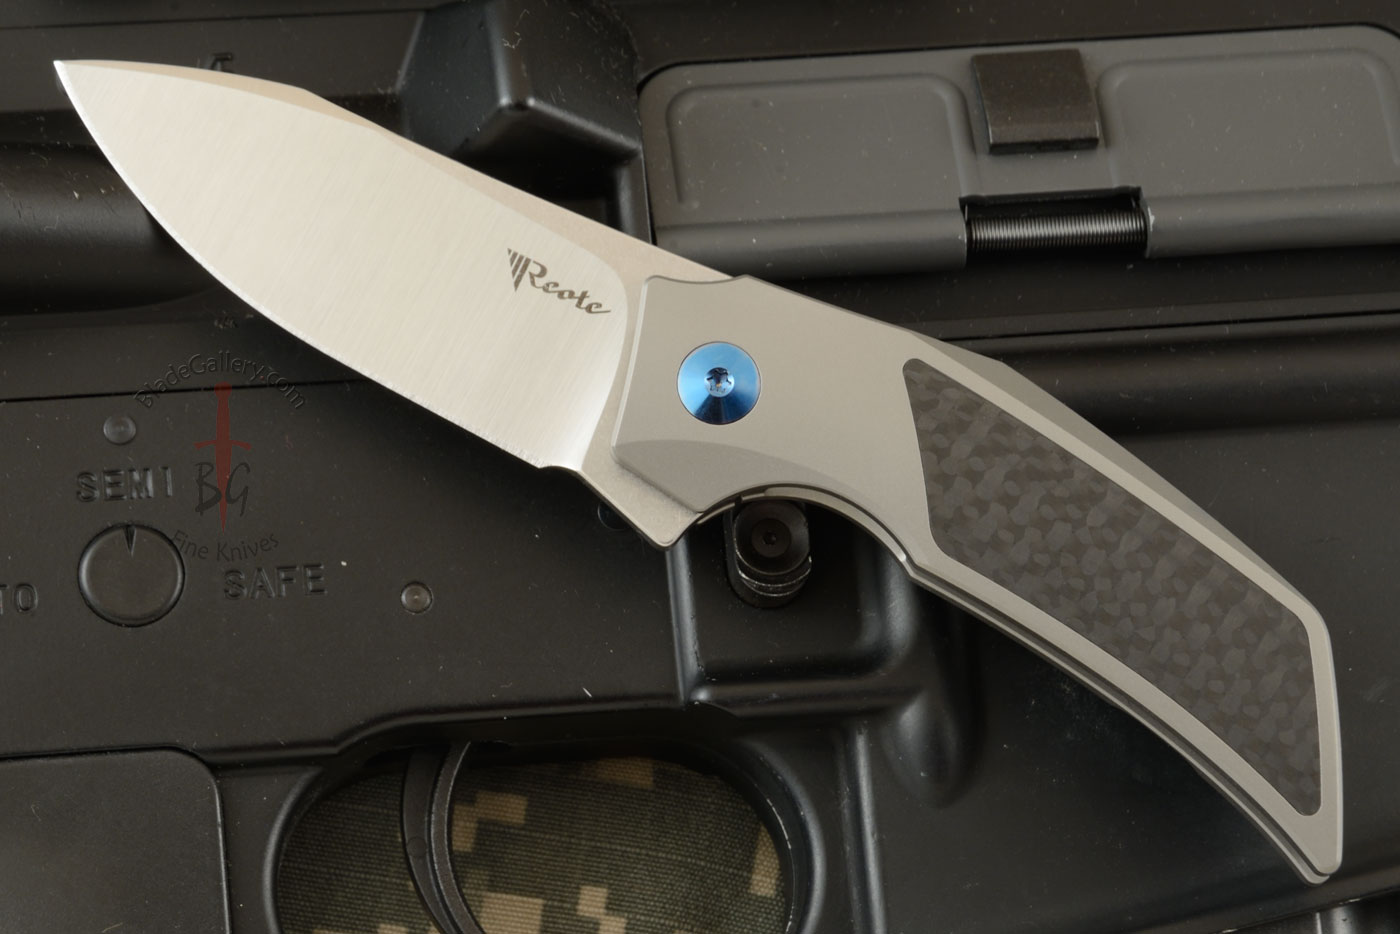 T2500 Frame Lock Flipper with Ti, Carbon Fiber, and M390